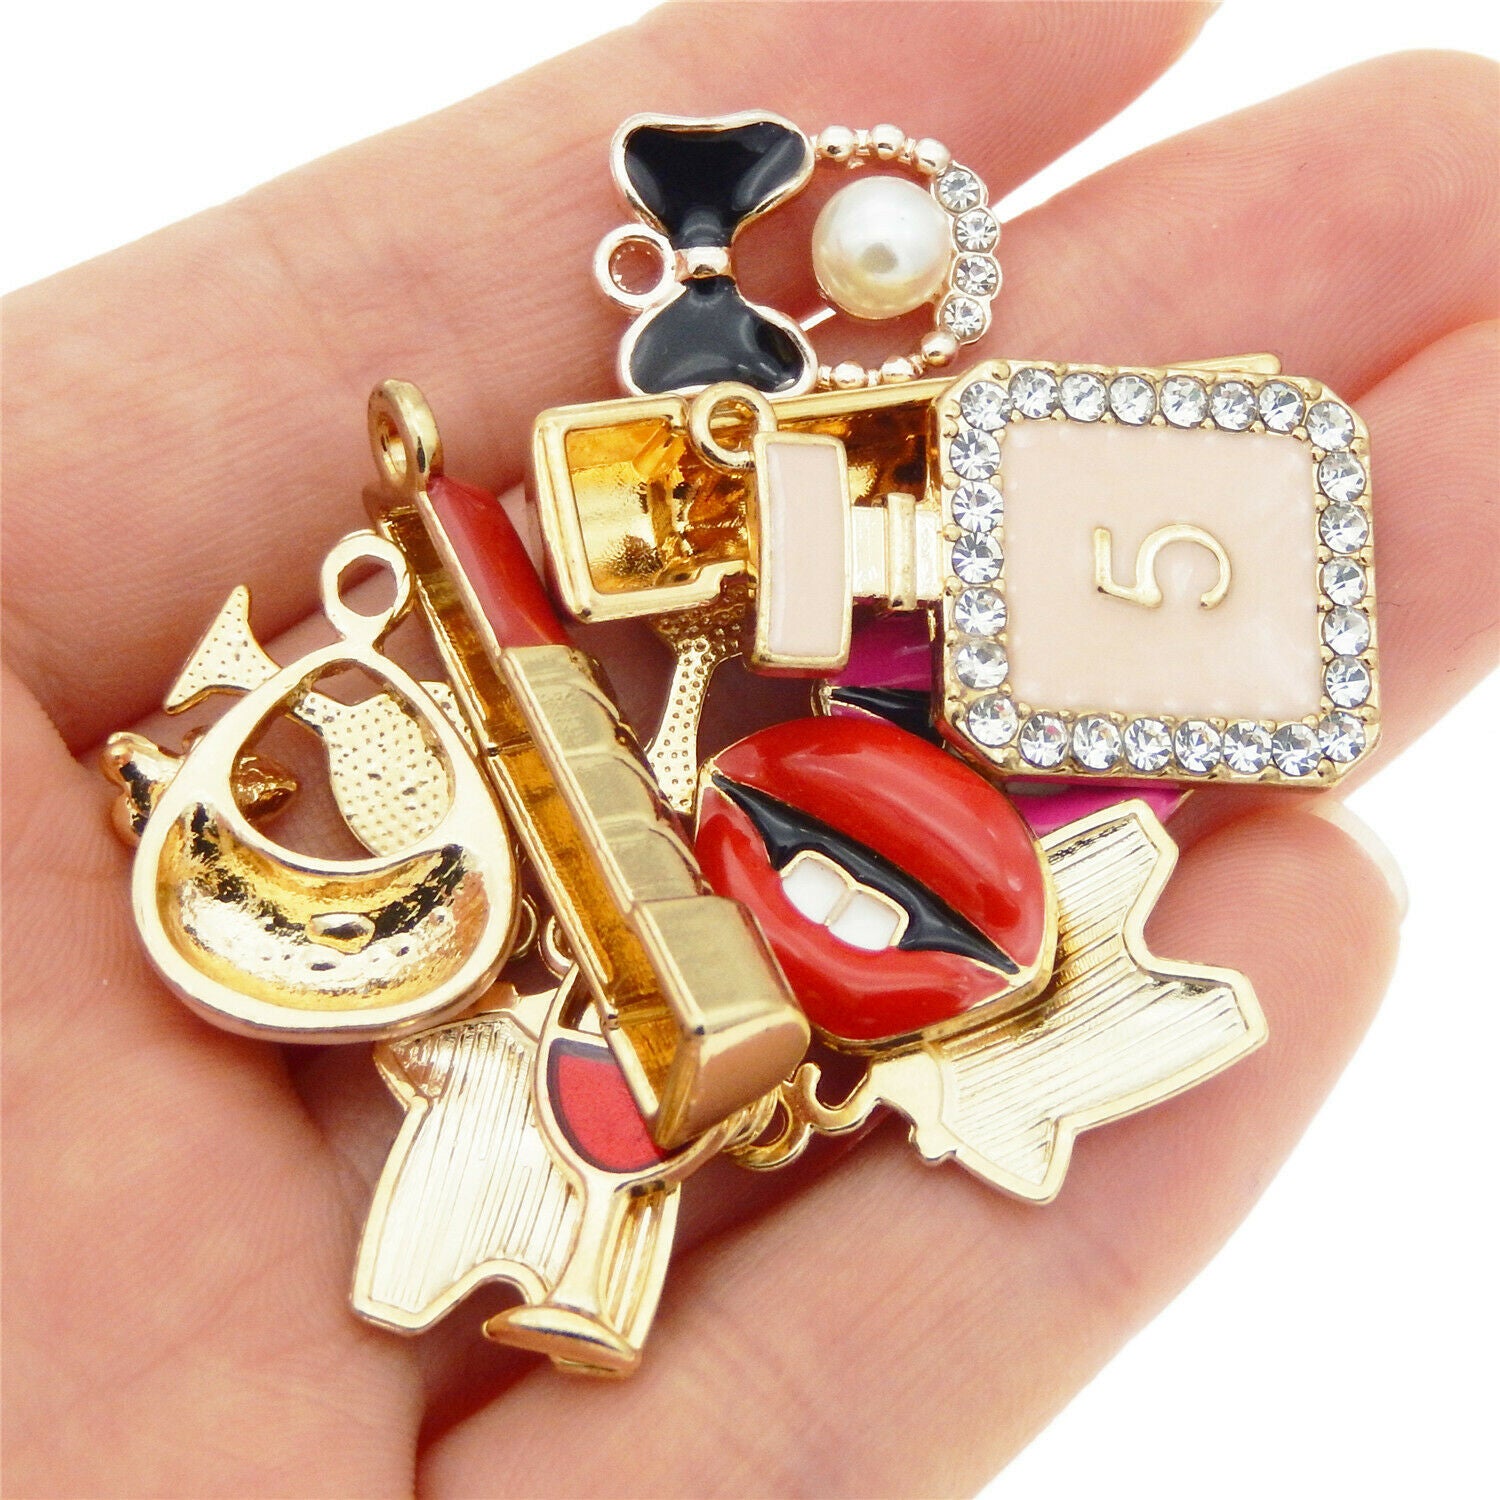 10 Mix Lot Purse Bag Charm Enamel Makeup Accessories DIY Crafting Jewelry Making